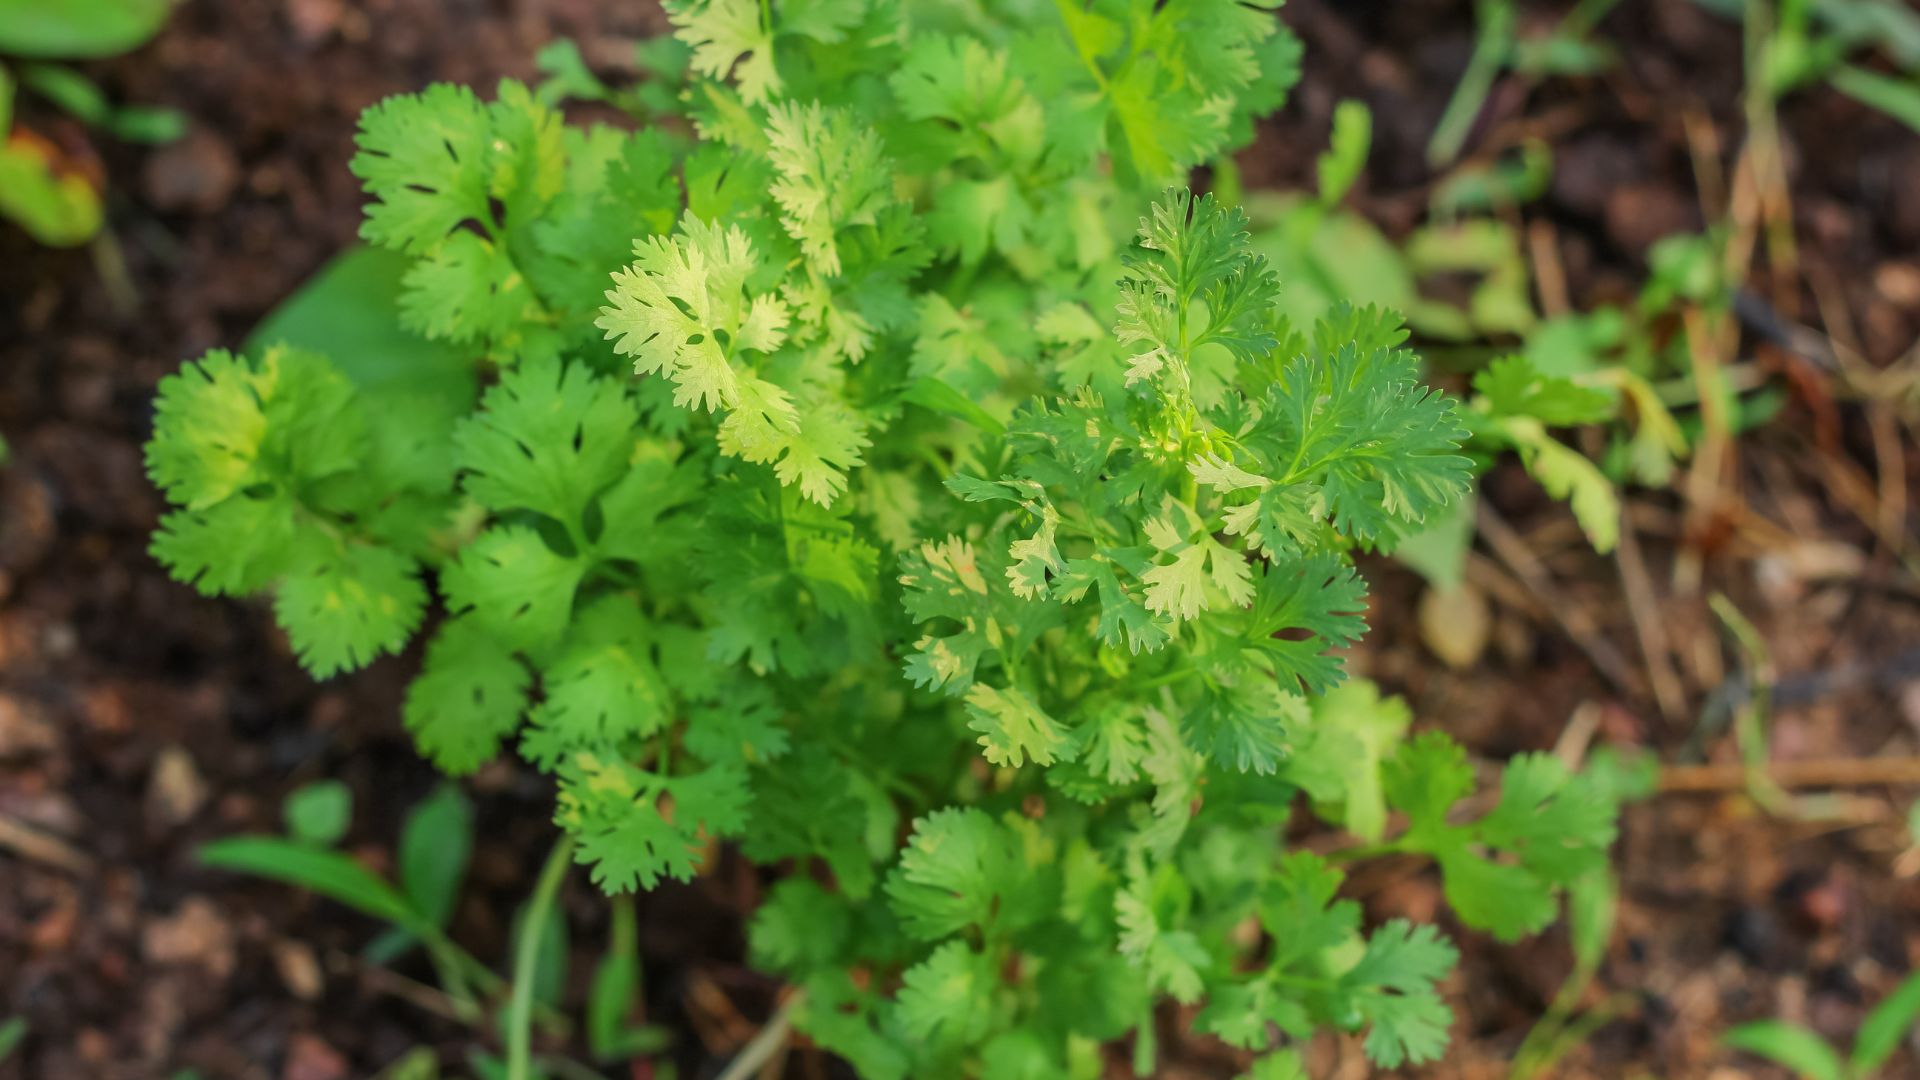 Growing Luscious Cilantro Has Never Been Easier With These Simple Tricks